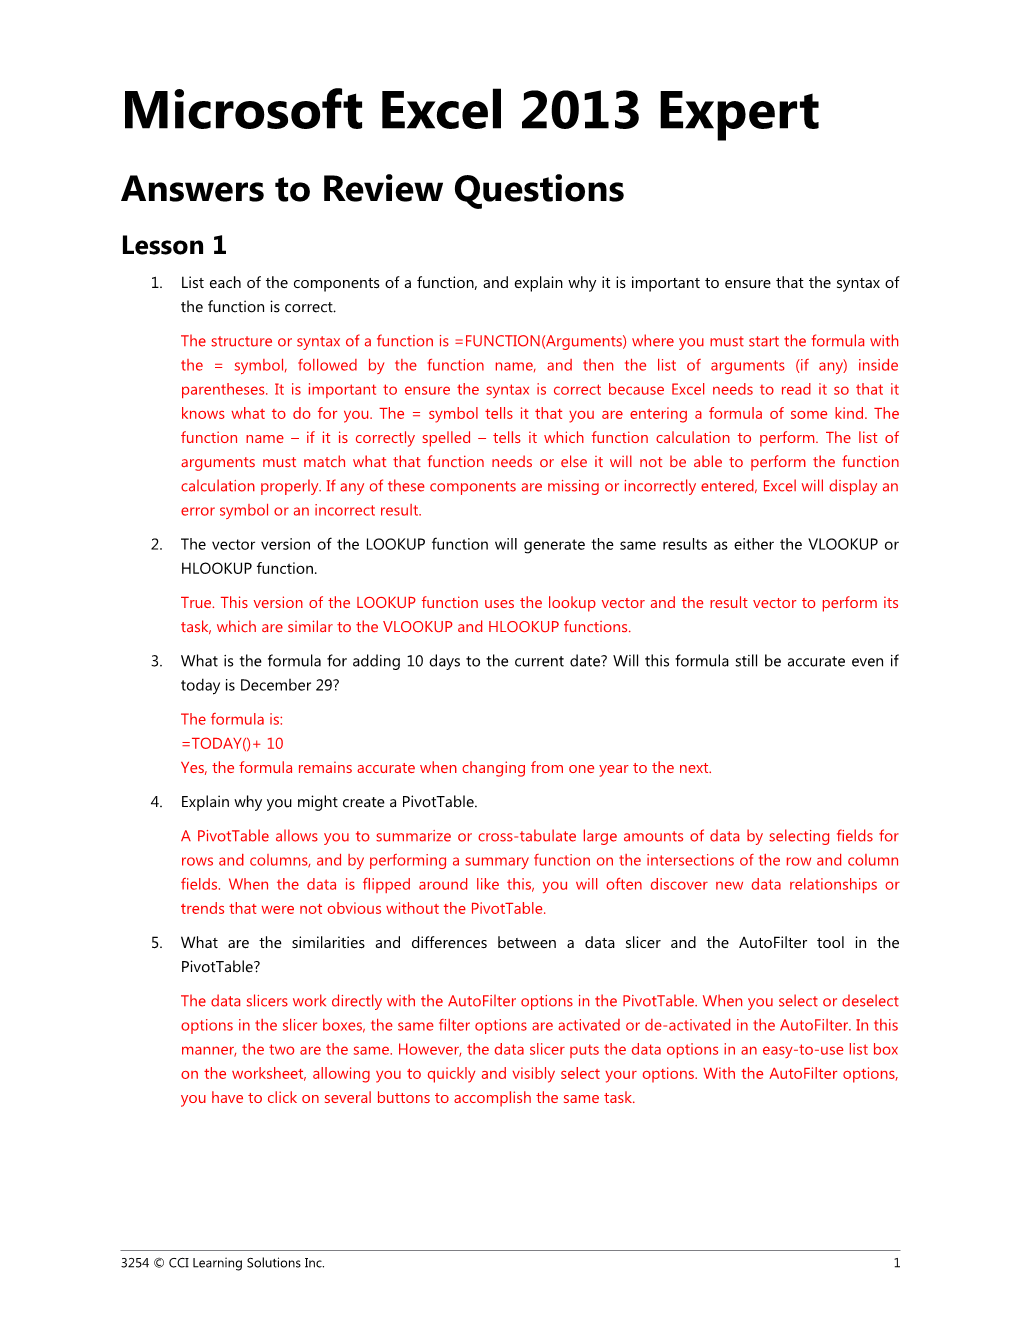 Review Questions Answer Key s1